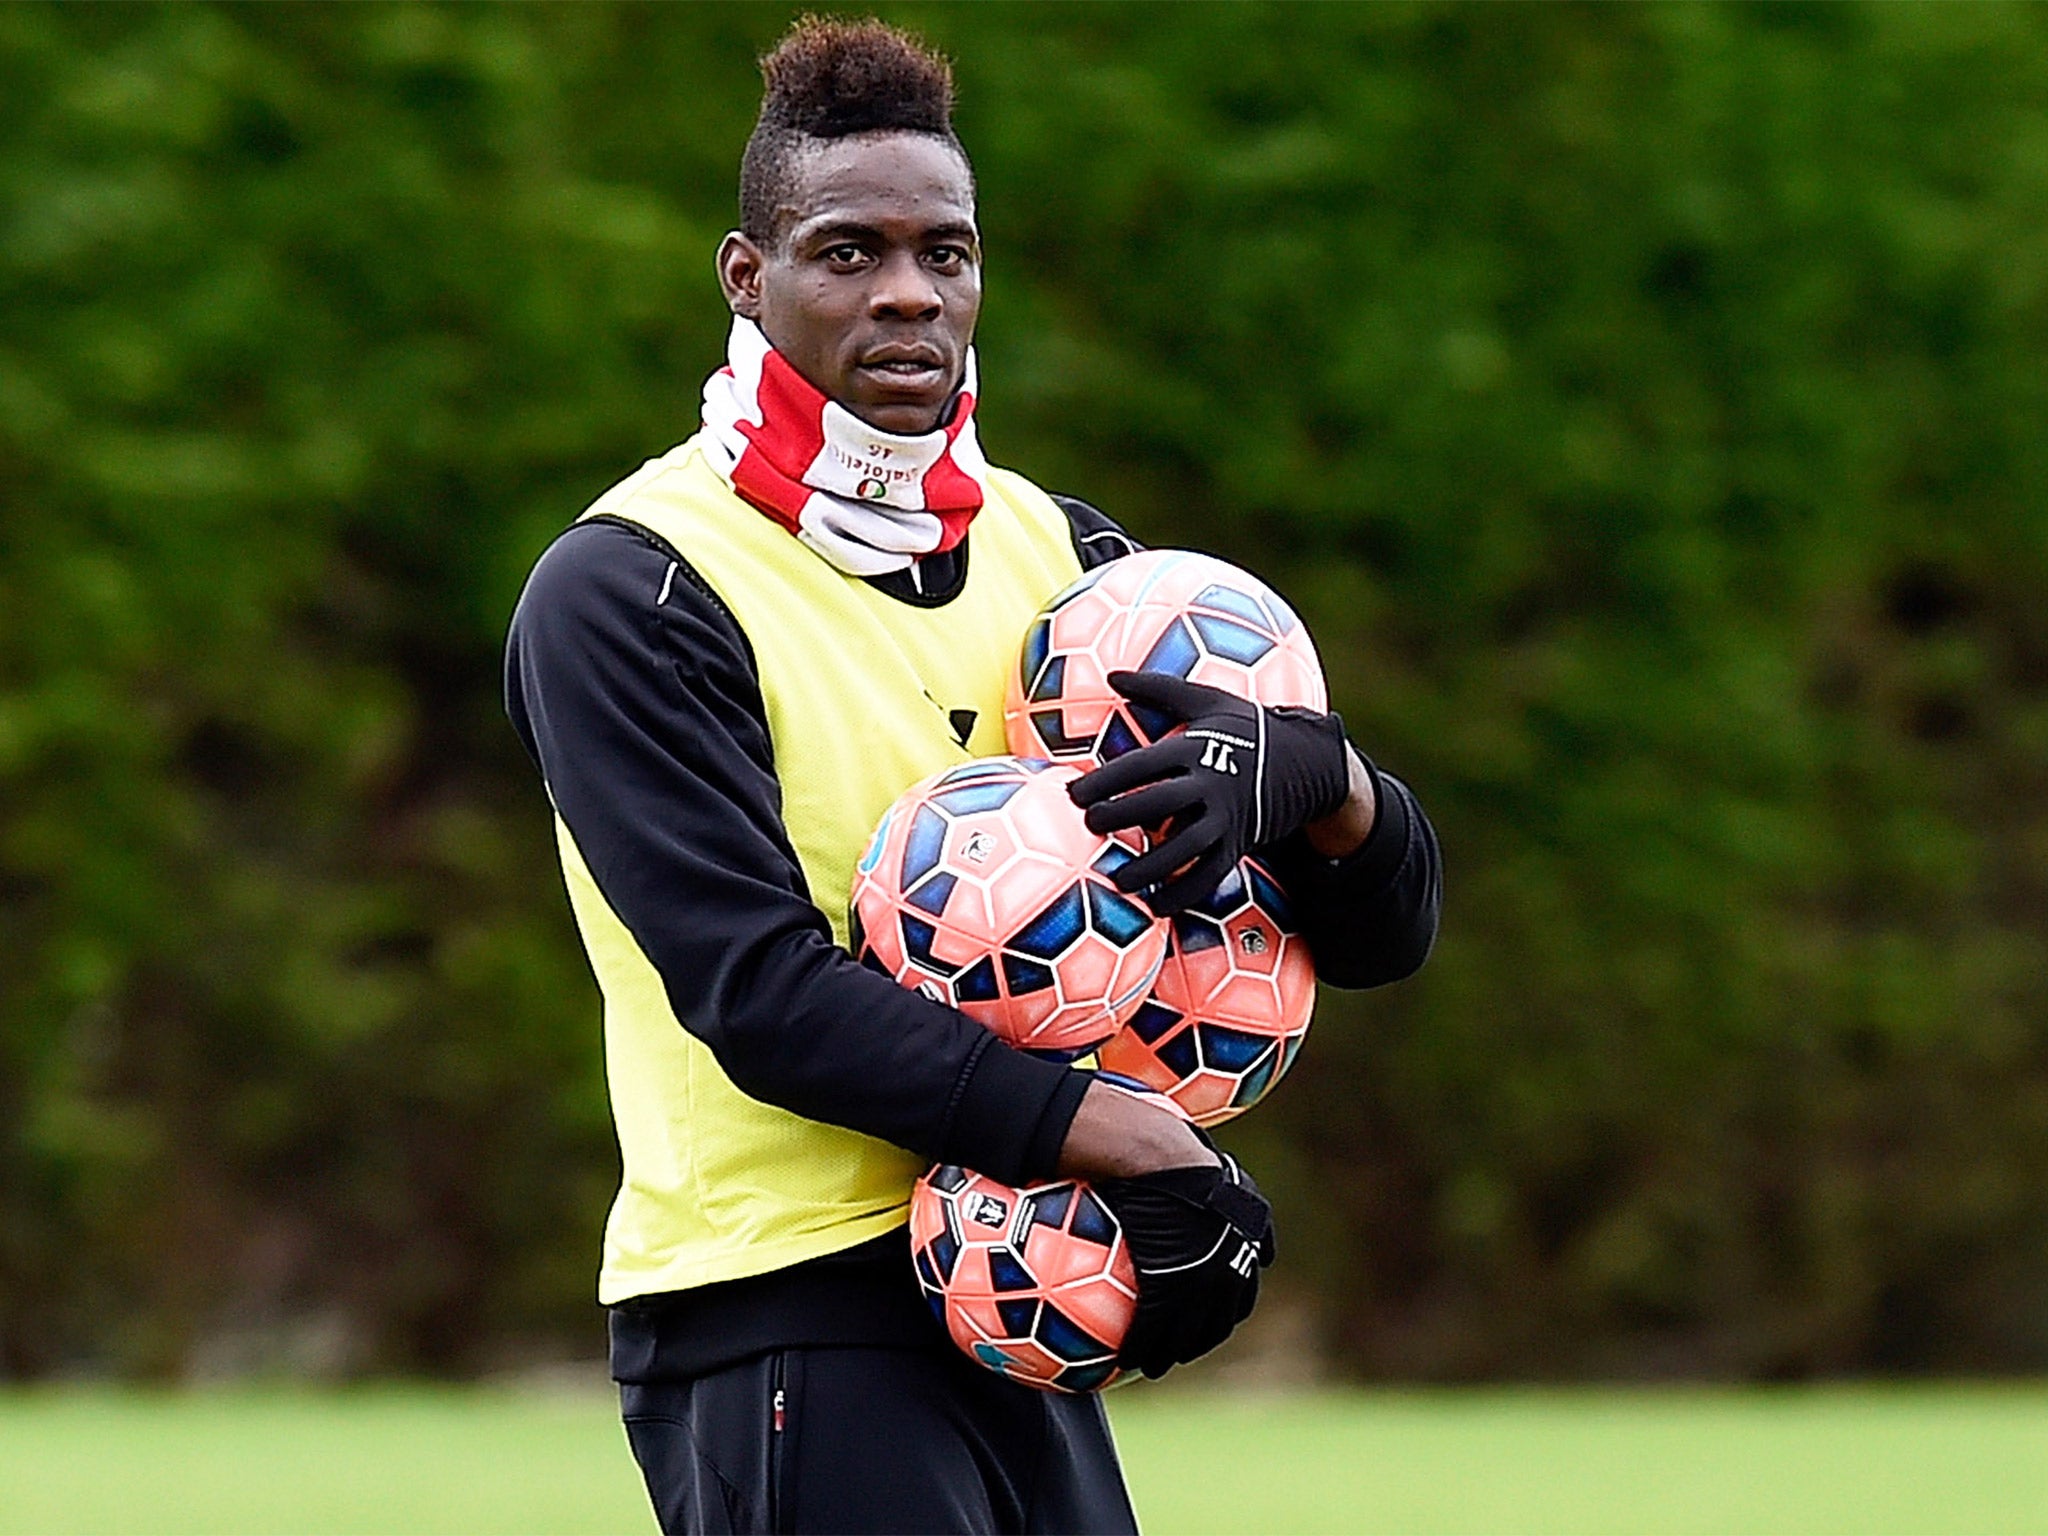 Mario Balotelli has found himself increasingly alienated at Liverpool because of his attitude